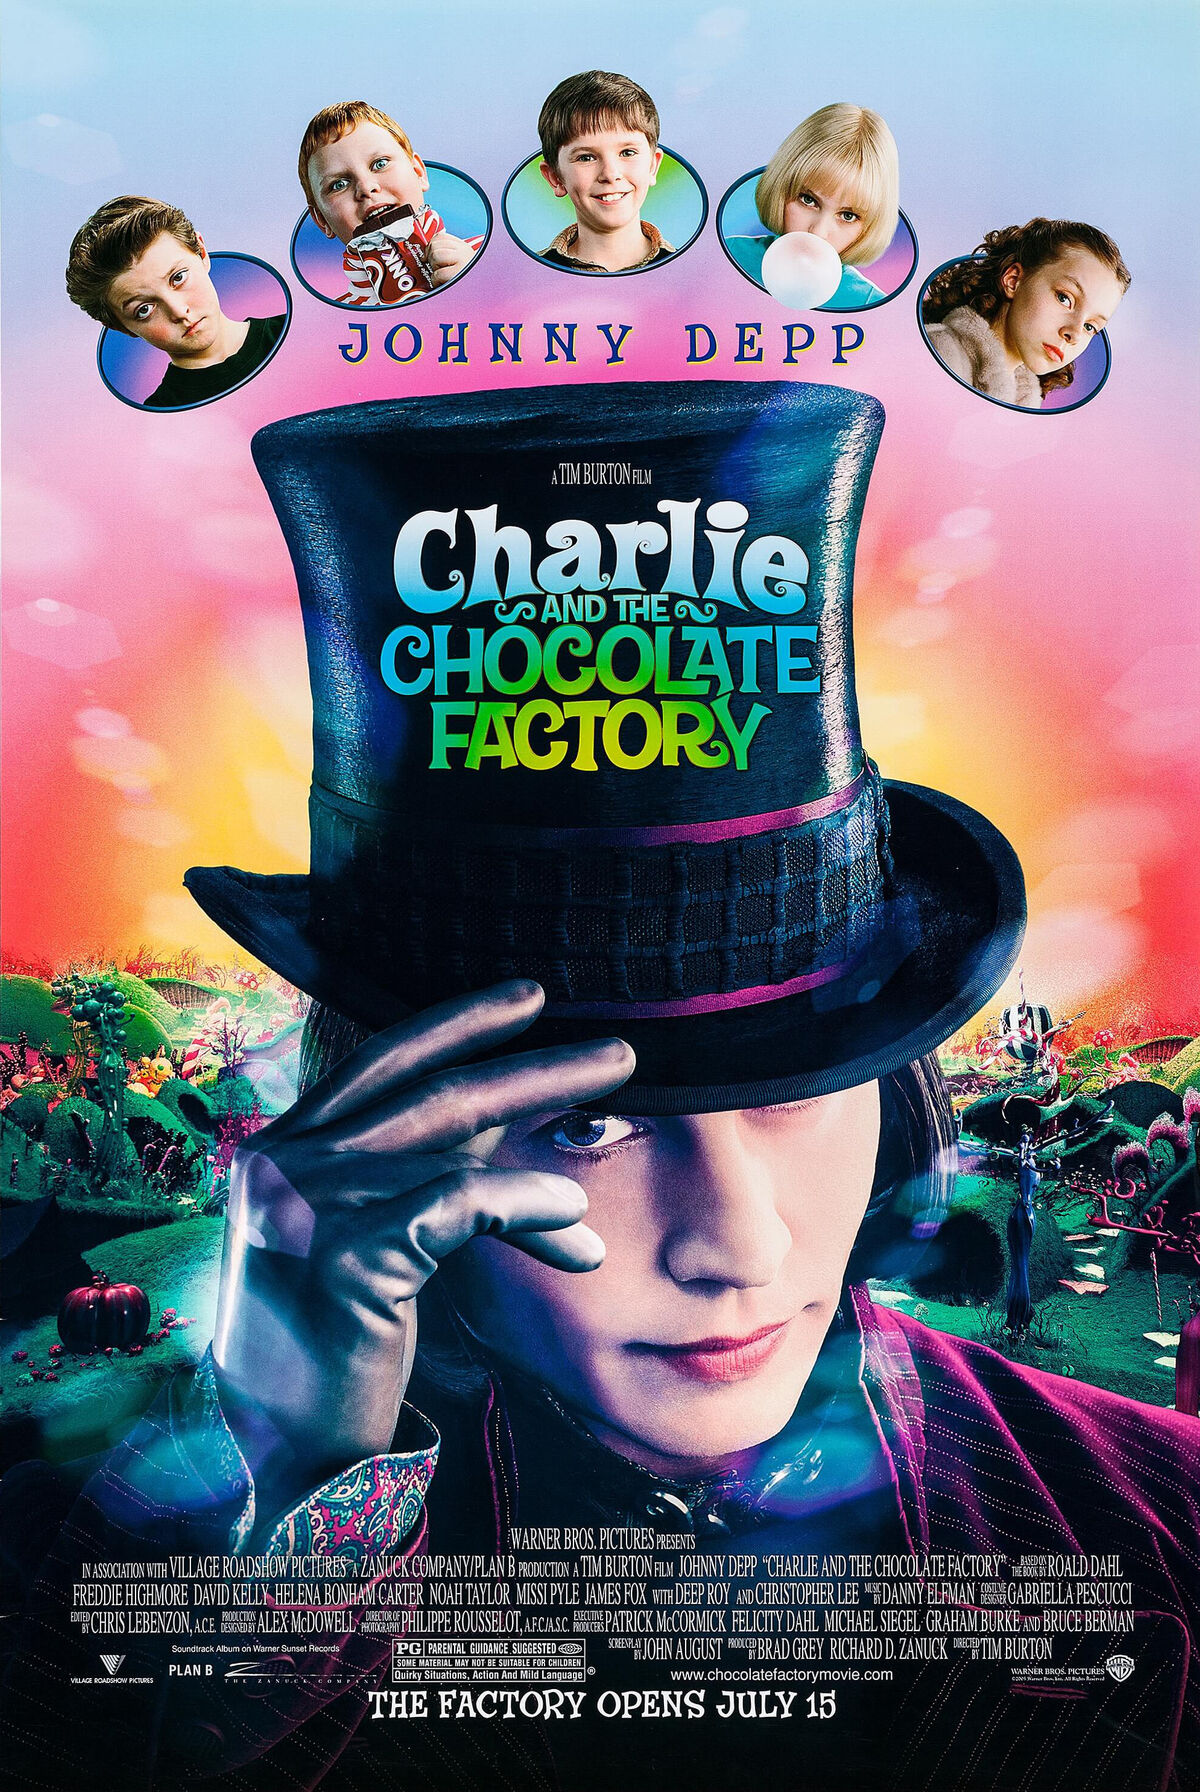 Charlie and the Chocolate Factory (film) Warner Bros